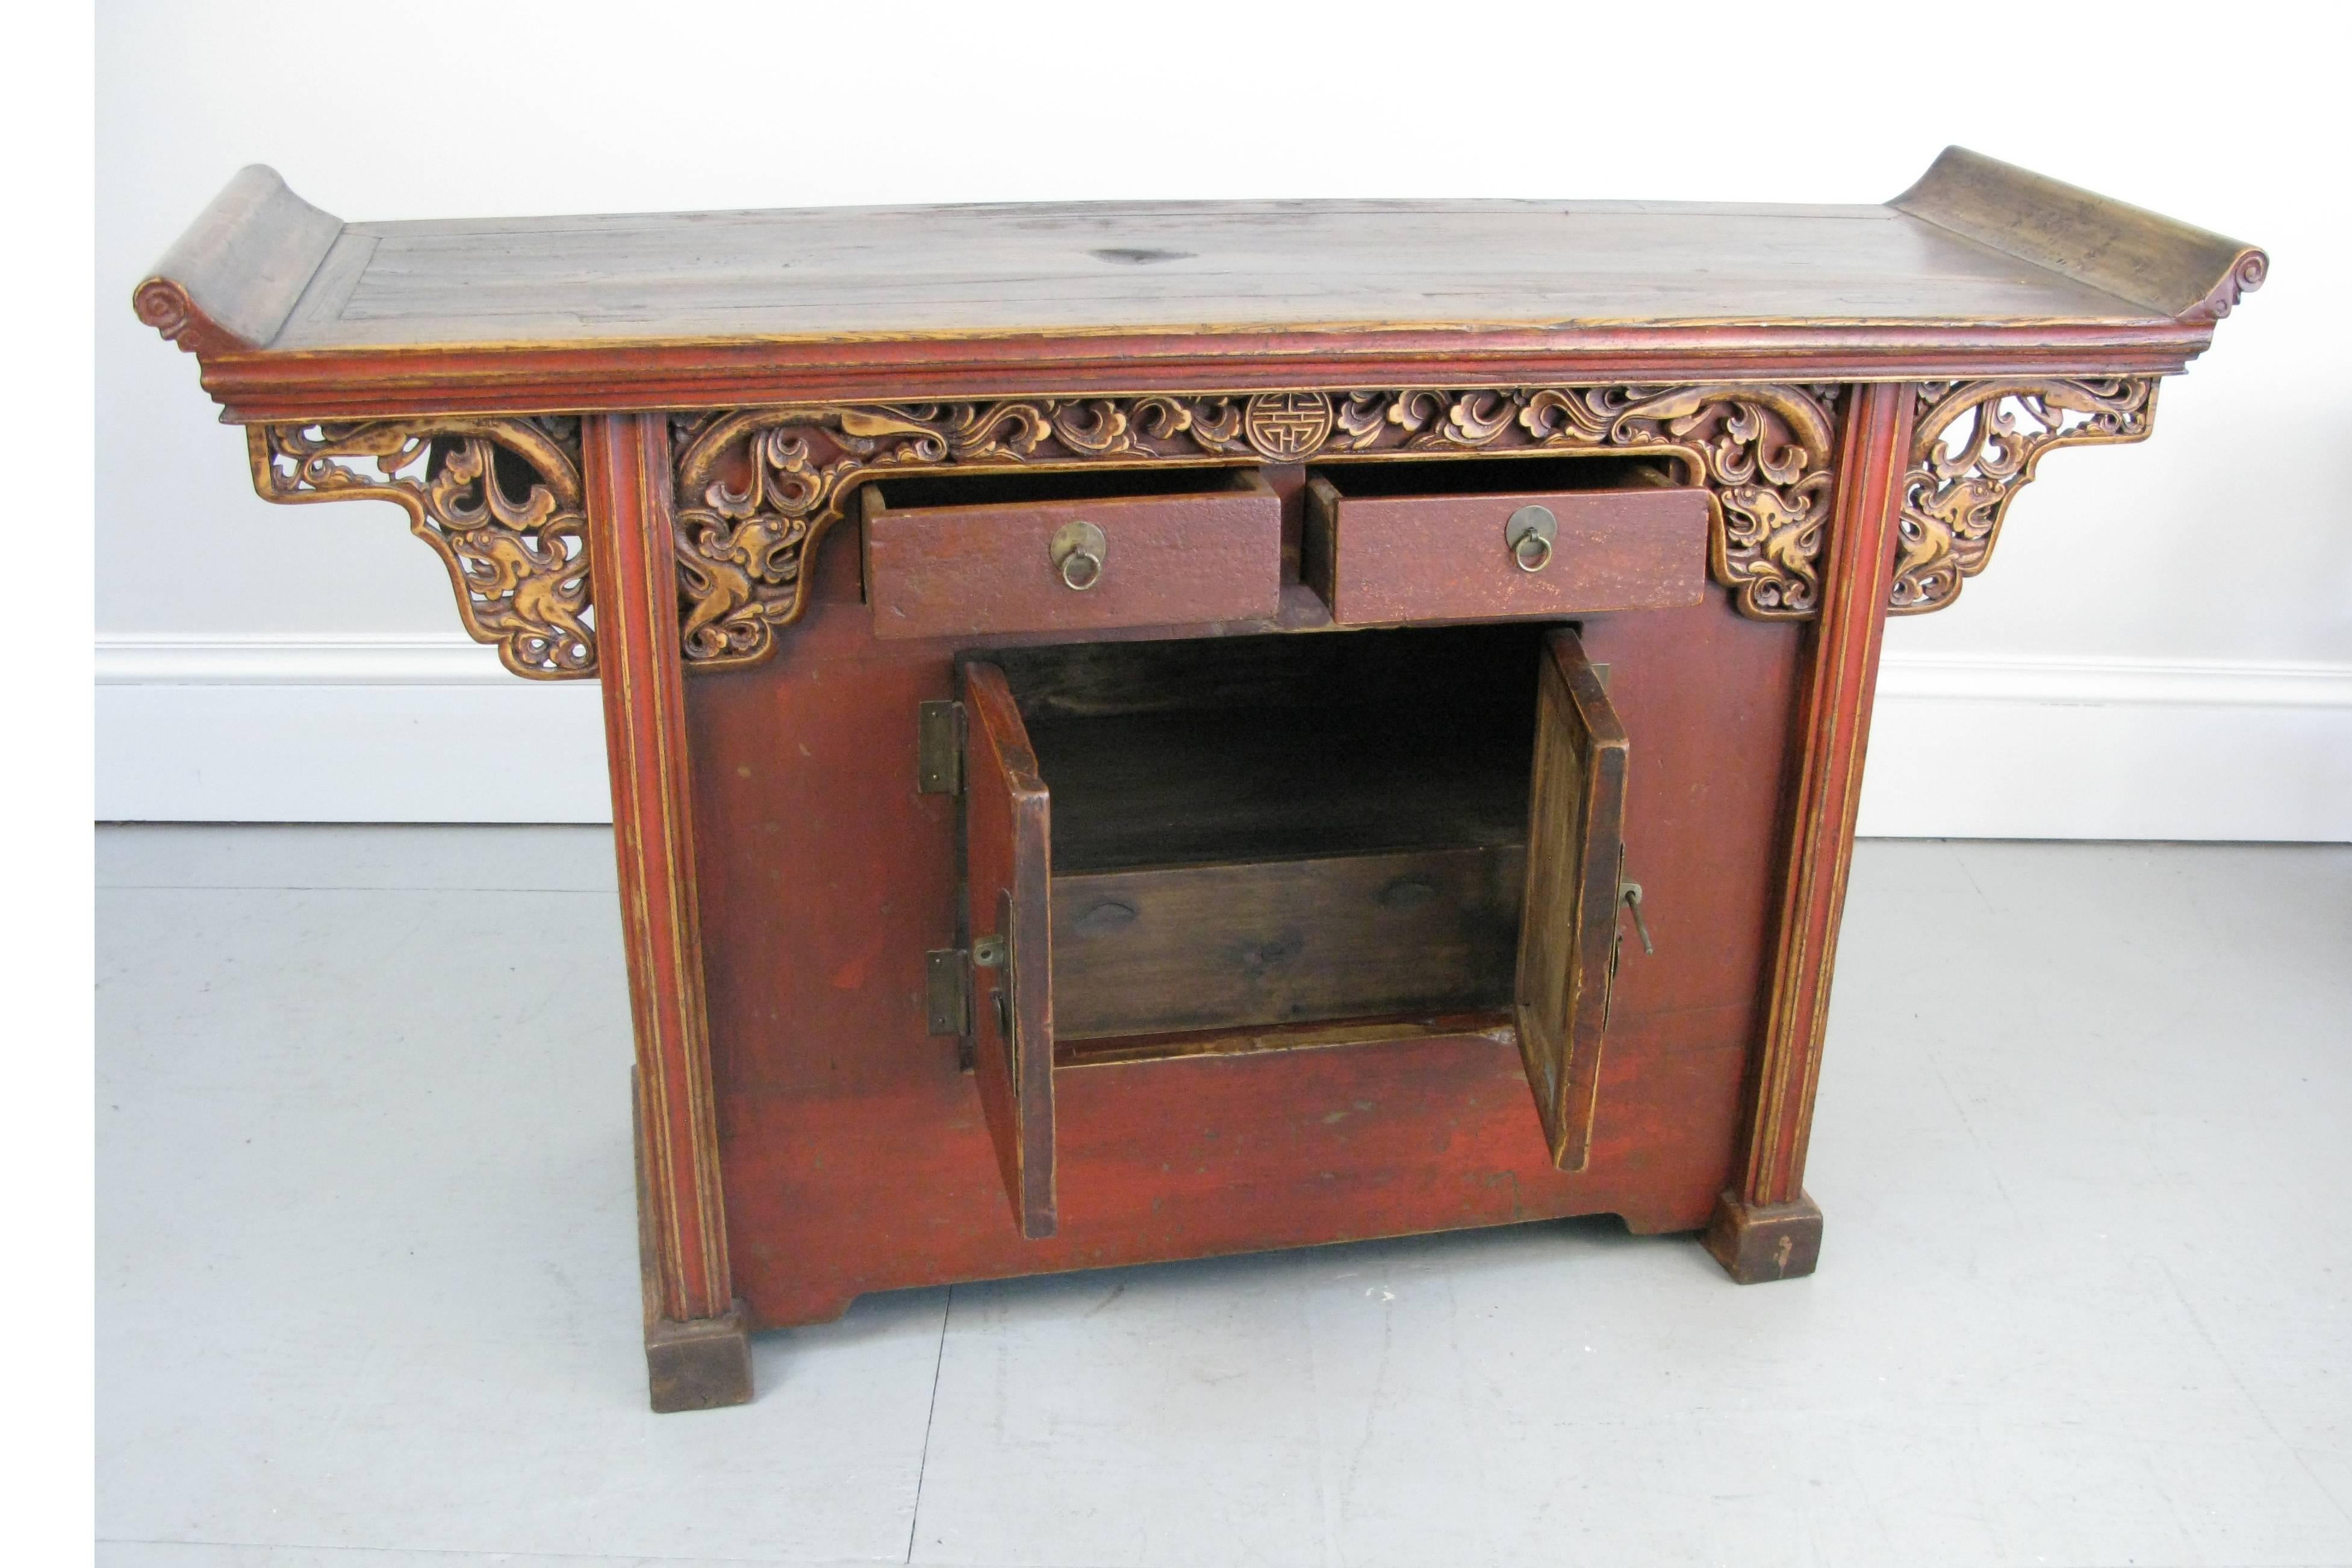 Woodwork 1900-1910 Chinese Long Cabinet or Sideboard